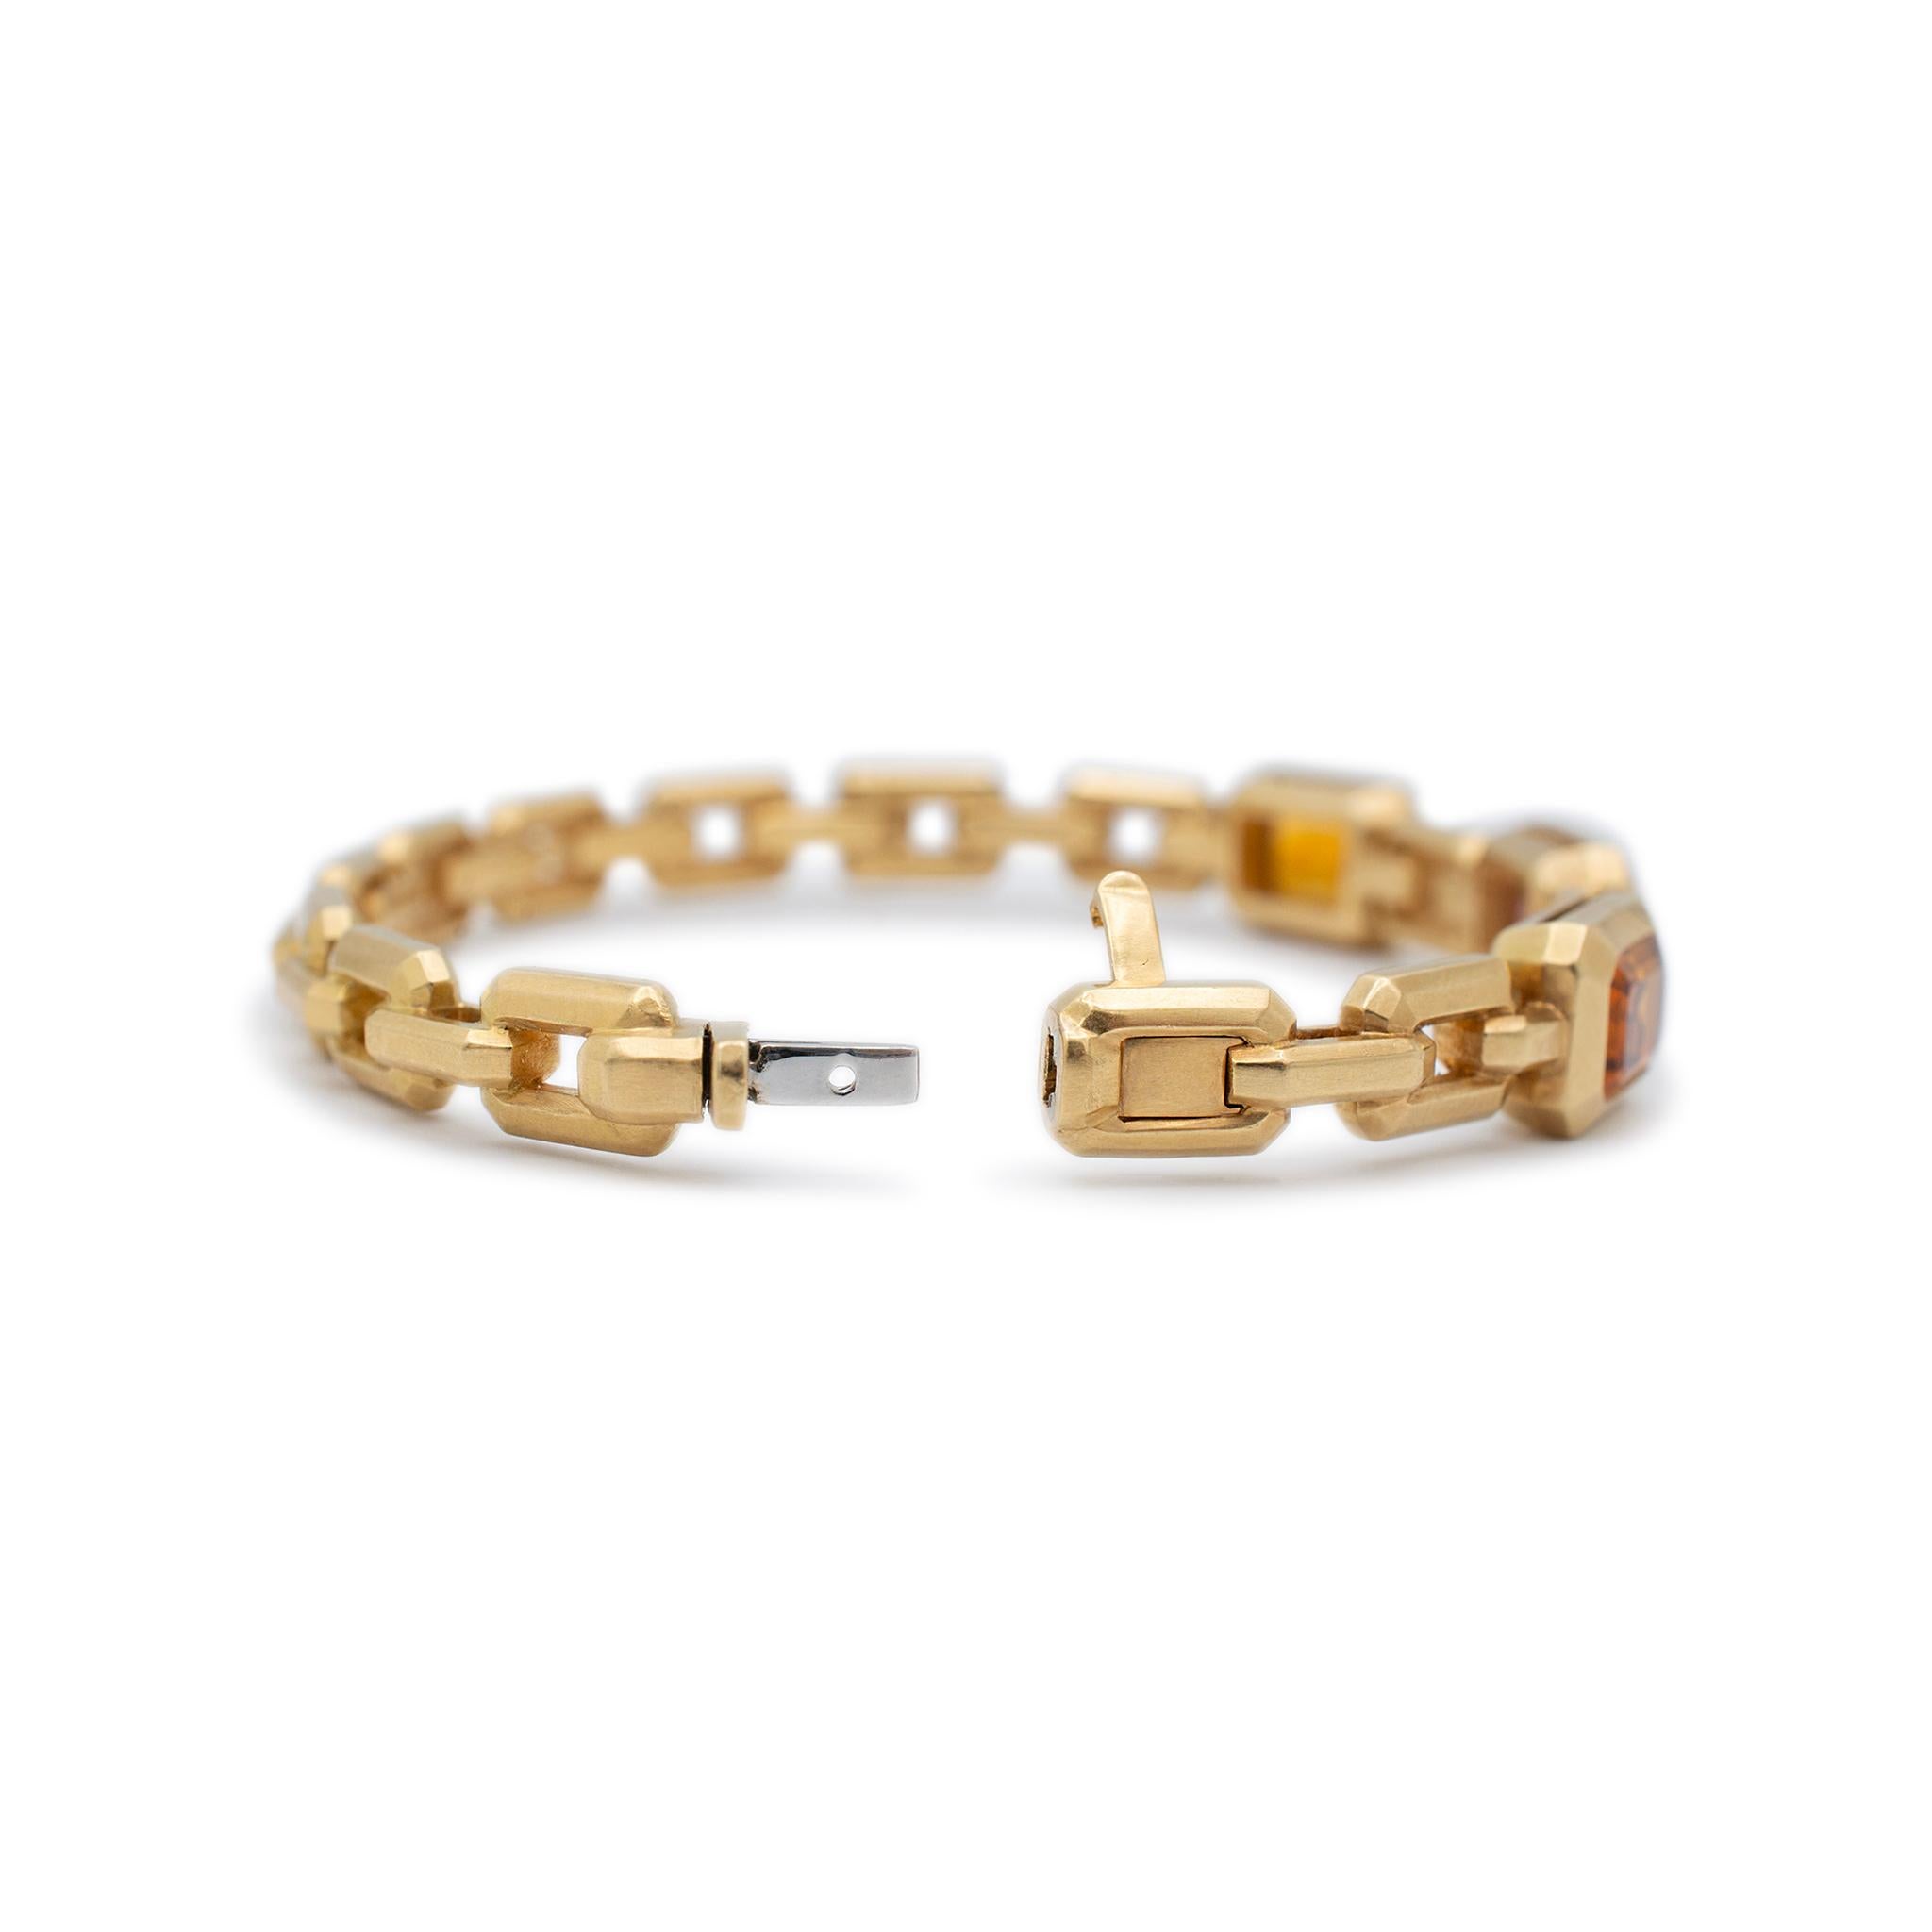 Brand: David Yurman

Gender: Ladies

Metal Type: 18K Yellow Gold

Length: 6.00 inches

Width : 8.45 mm

Weight: 32.88 grams

18K yellow gold citrine and pink tourmaline bangle bracelet. The metal was tested and determined to be 18K yellow gold.